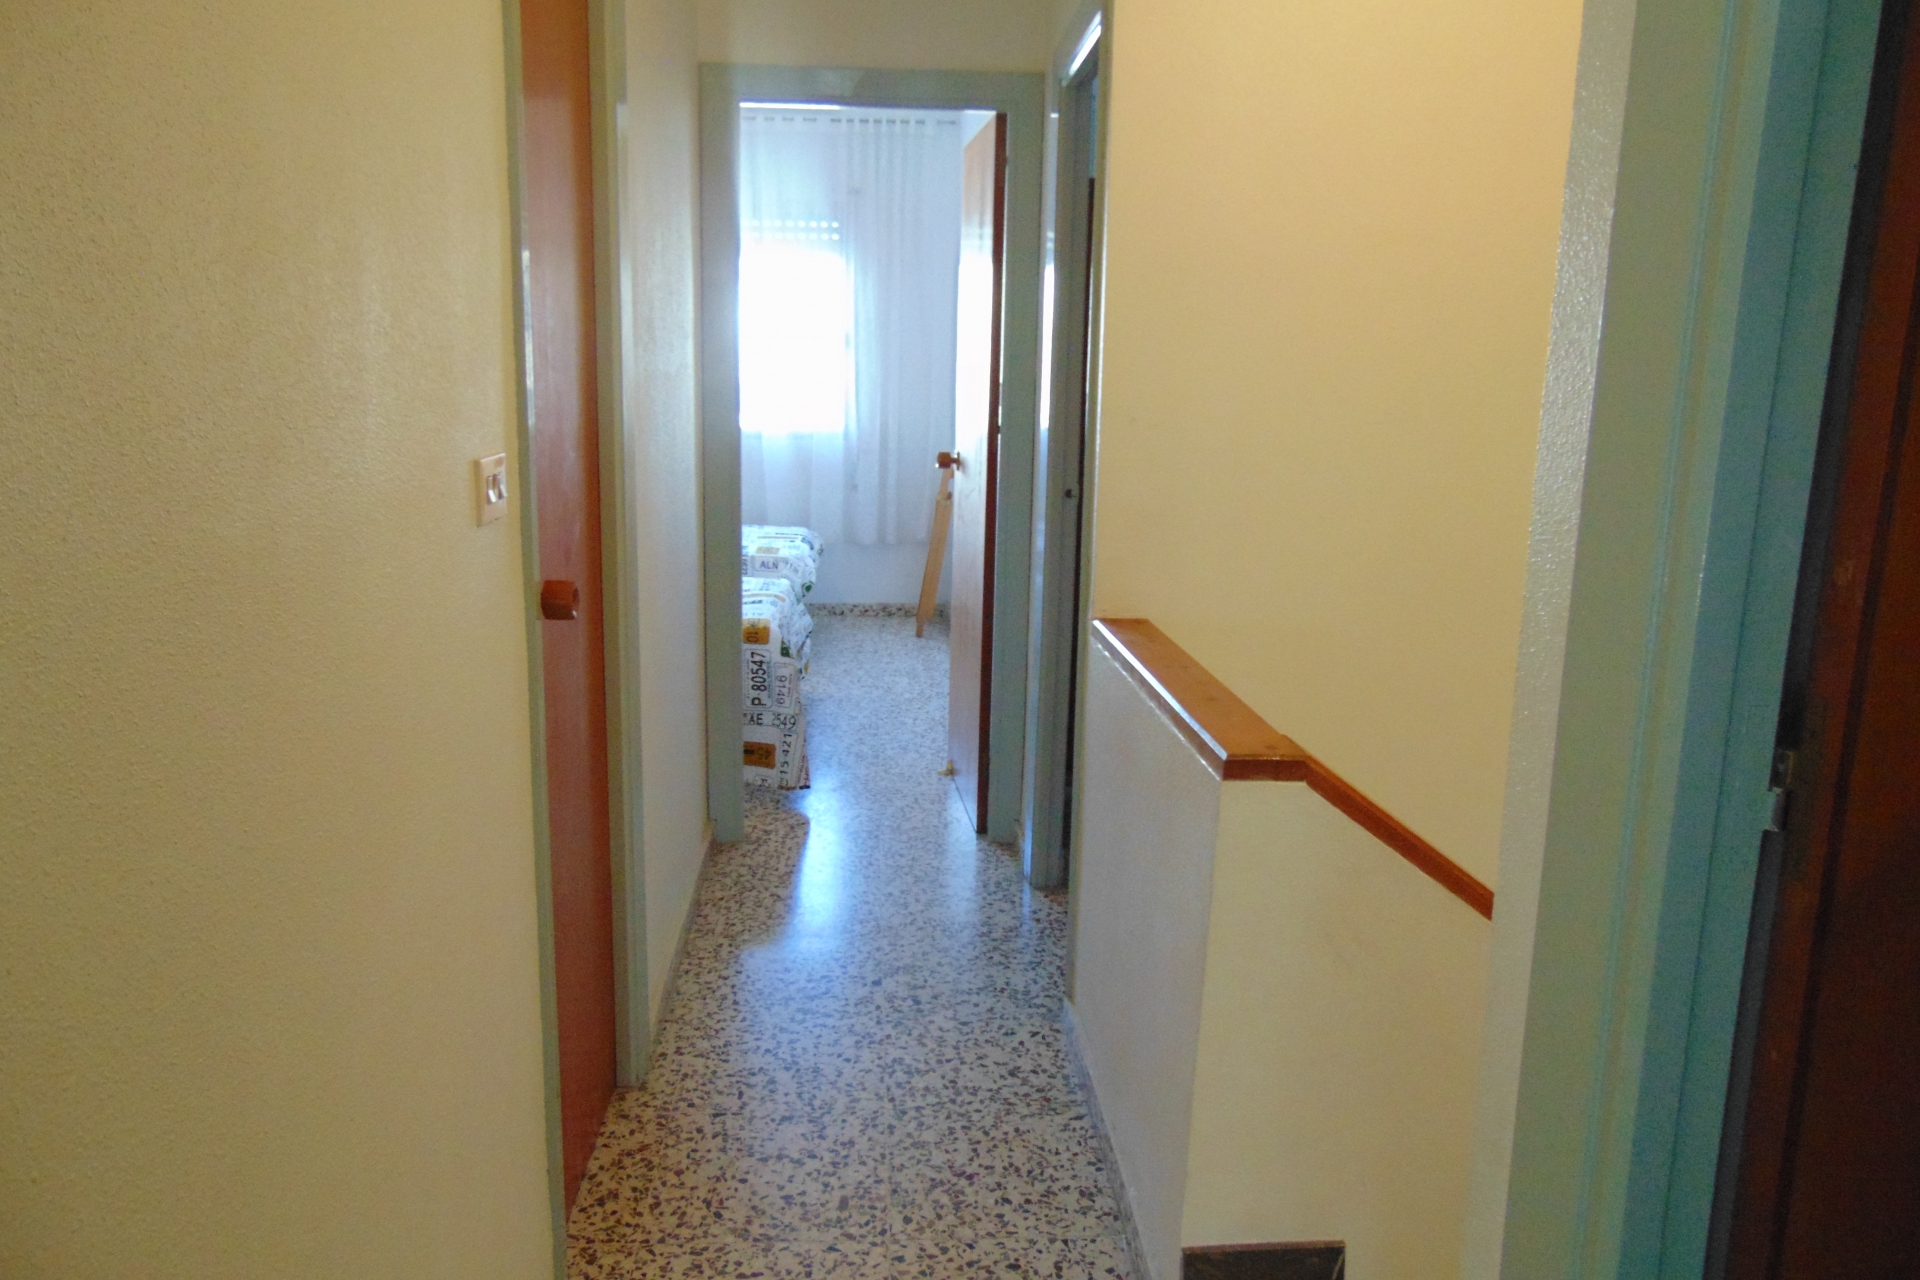 Archived - Townhouse for sale - Los Alcazares